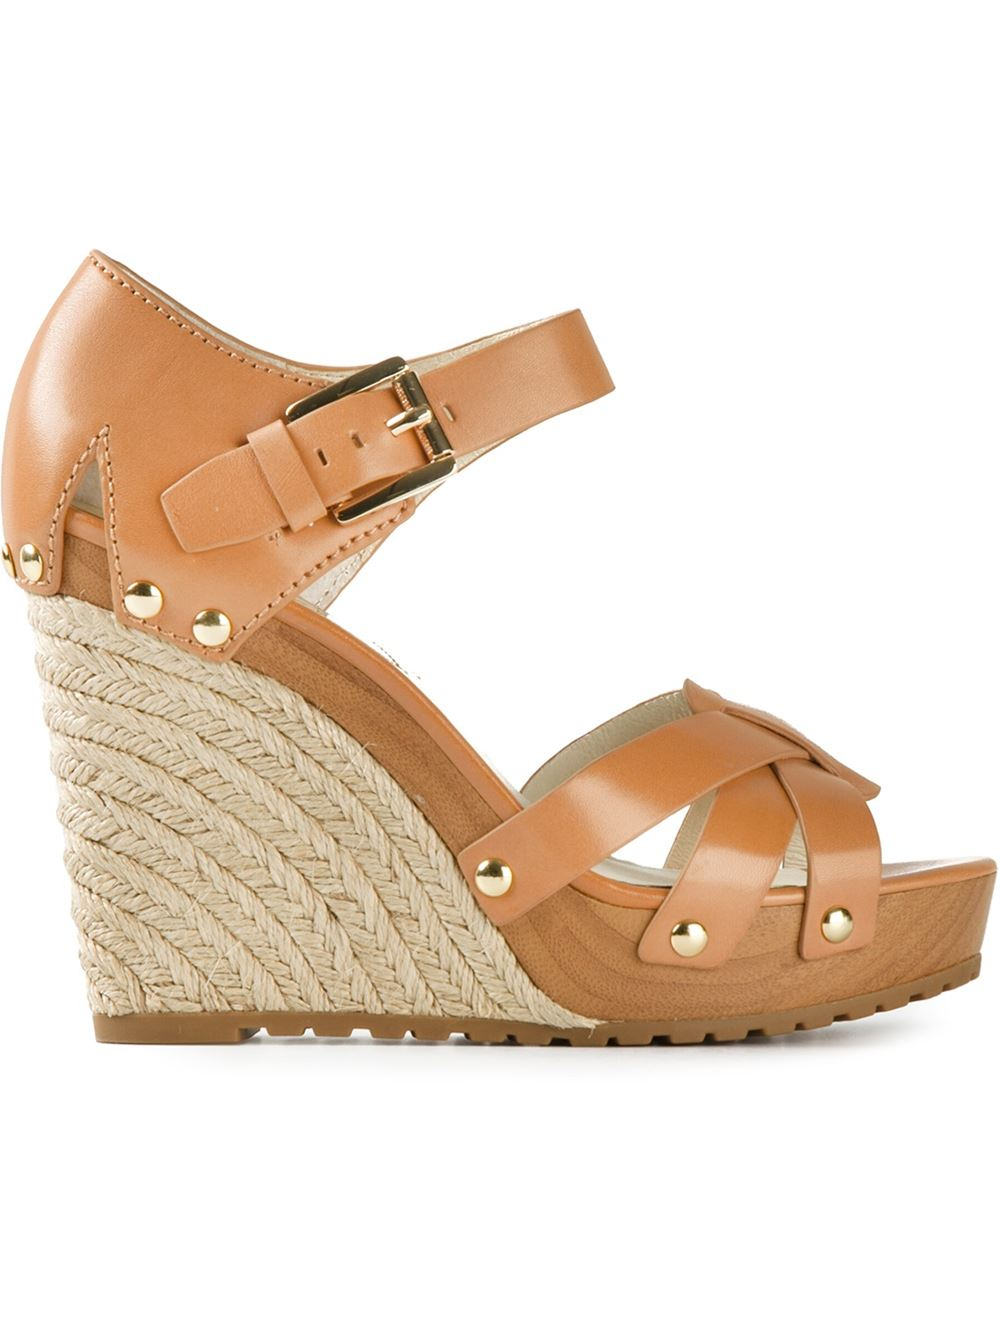 MICHAEL Michael Kors Somerly Wedge Sandals in Brown | Lyst